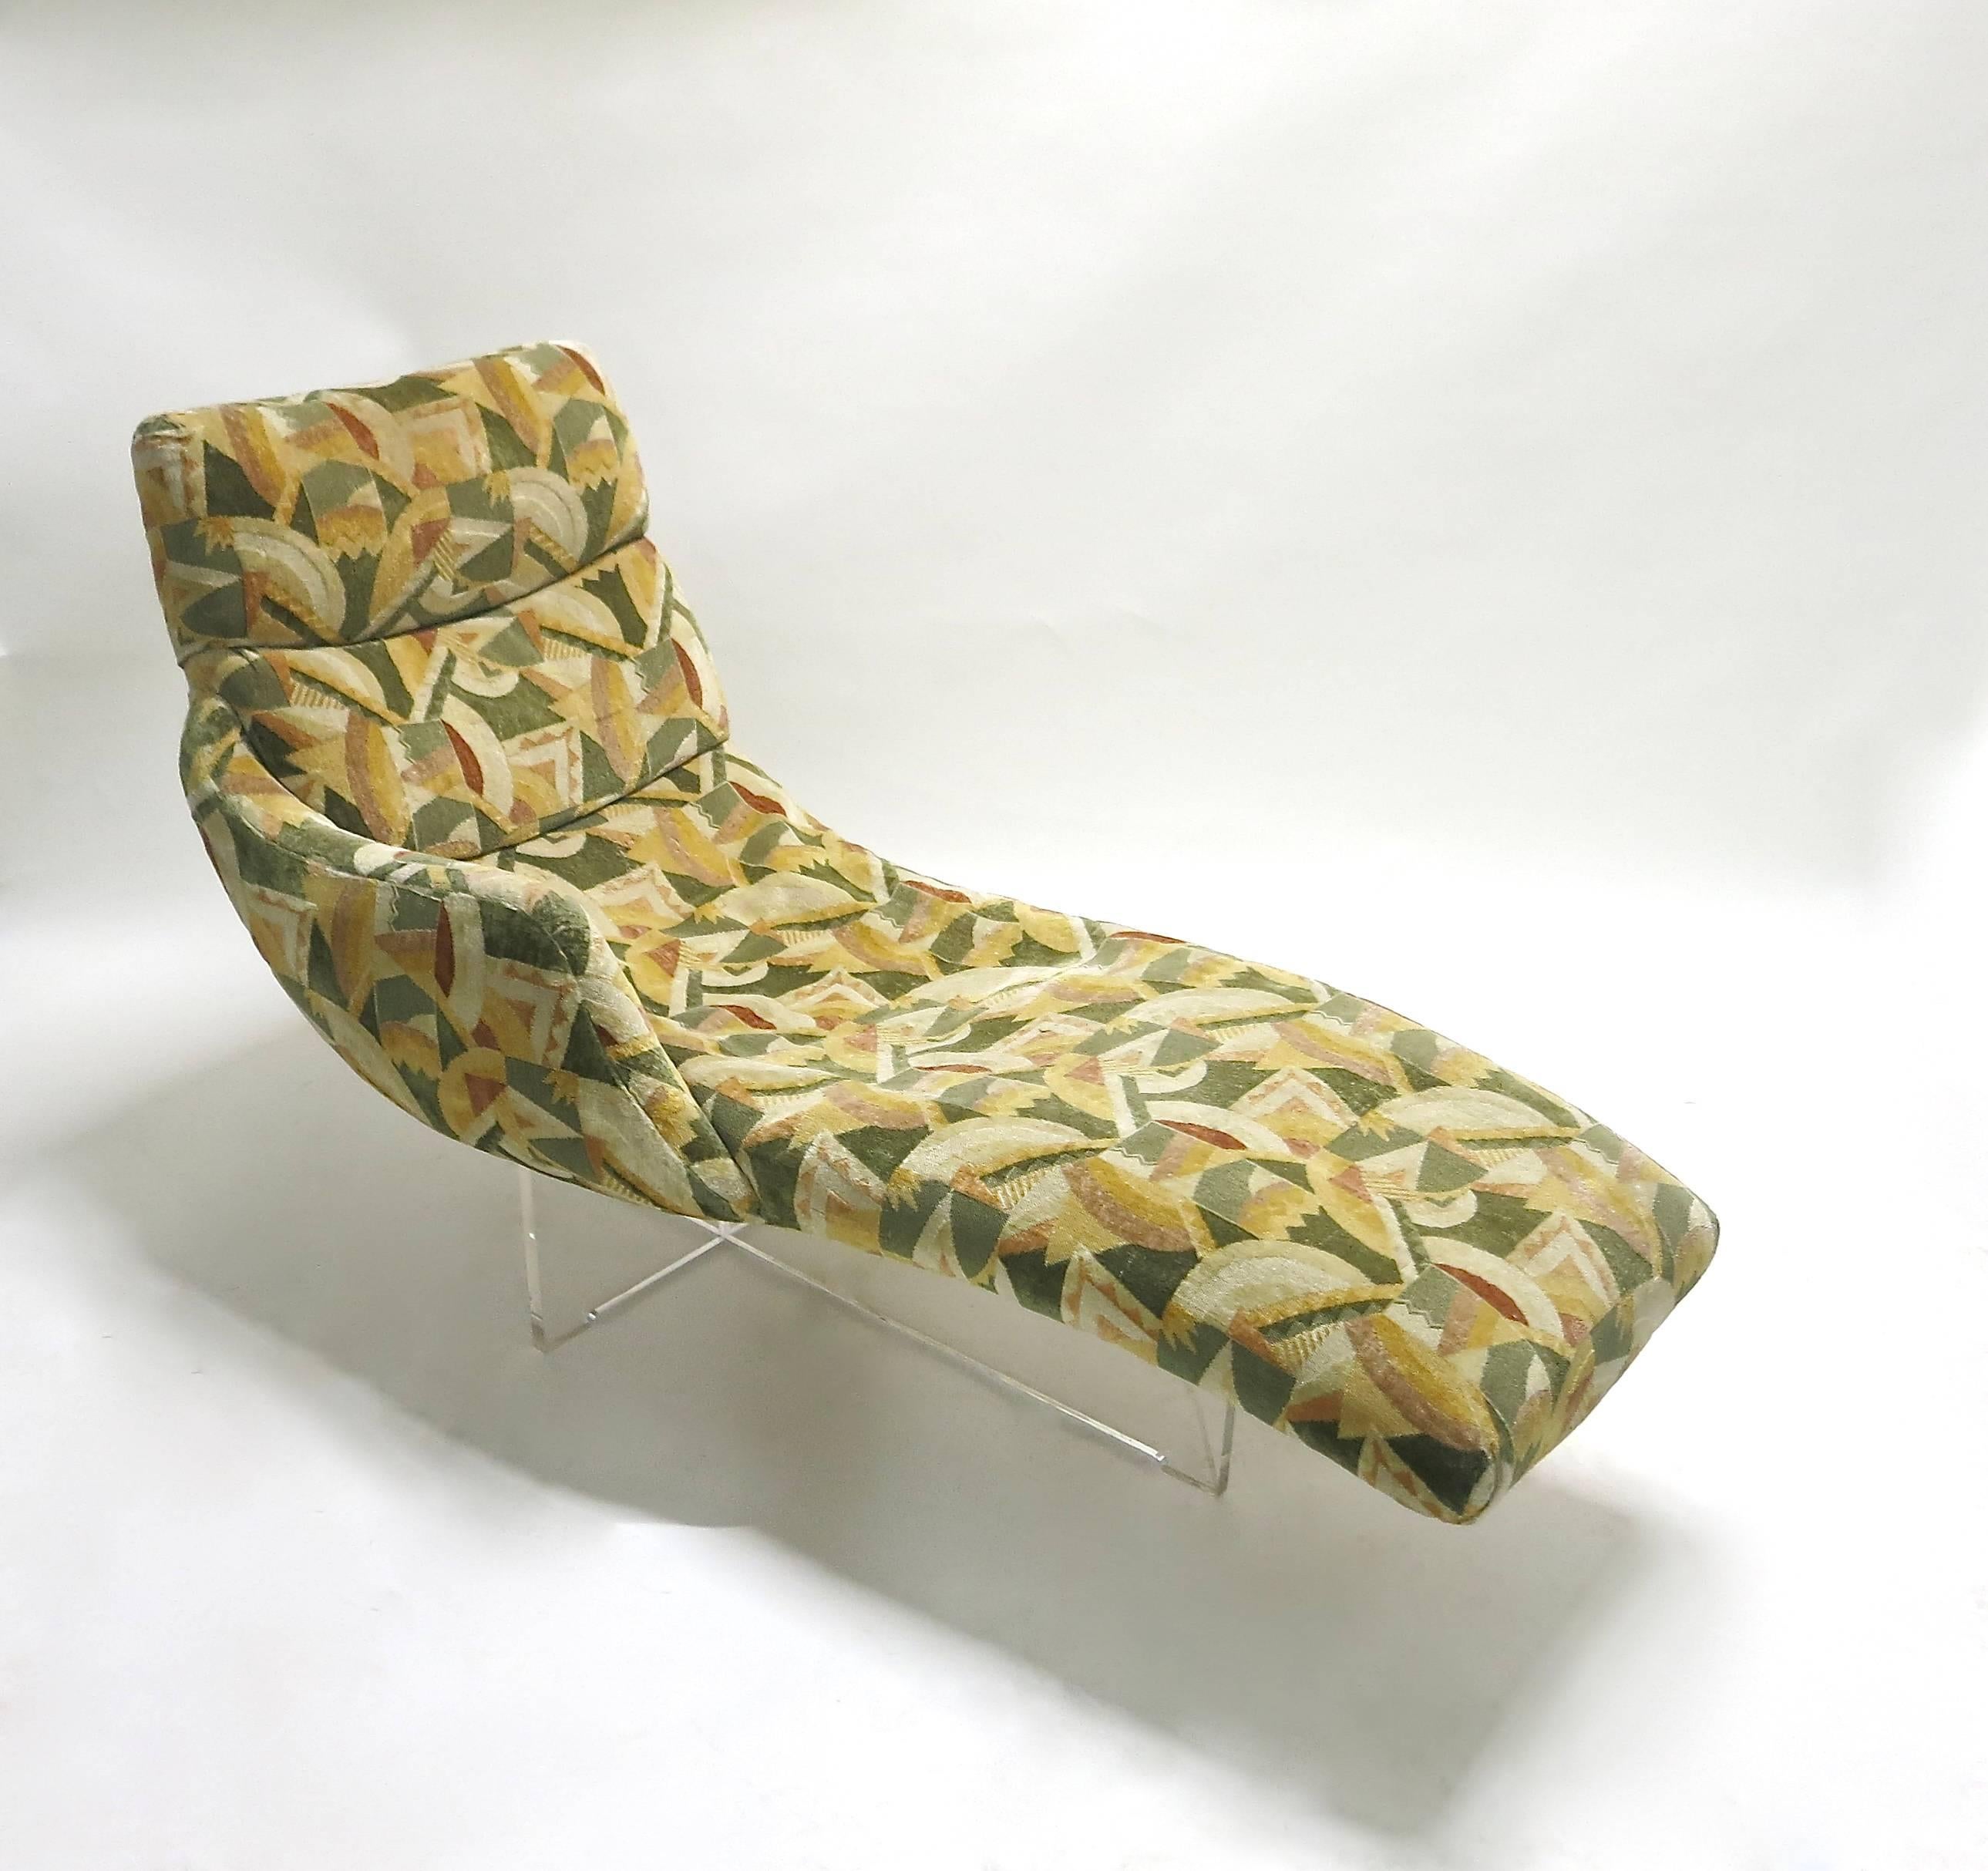 American Erica Chaise Longue Designed by Vladimir Kagan in 1969, Made in USA